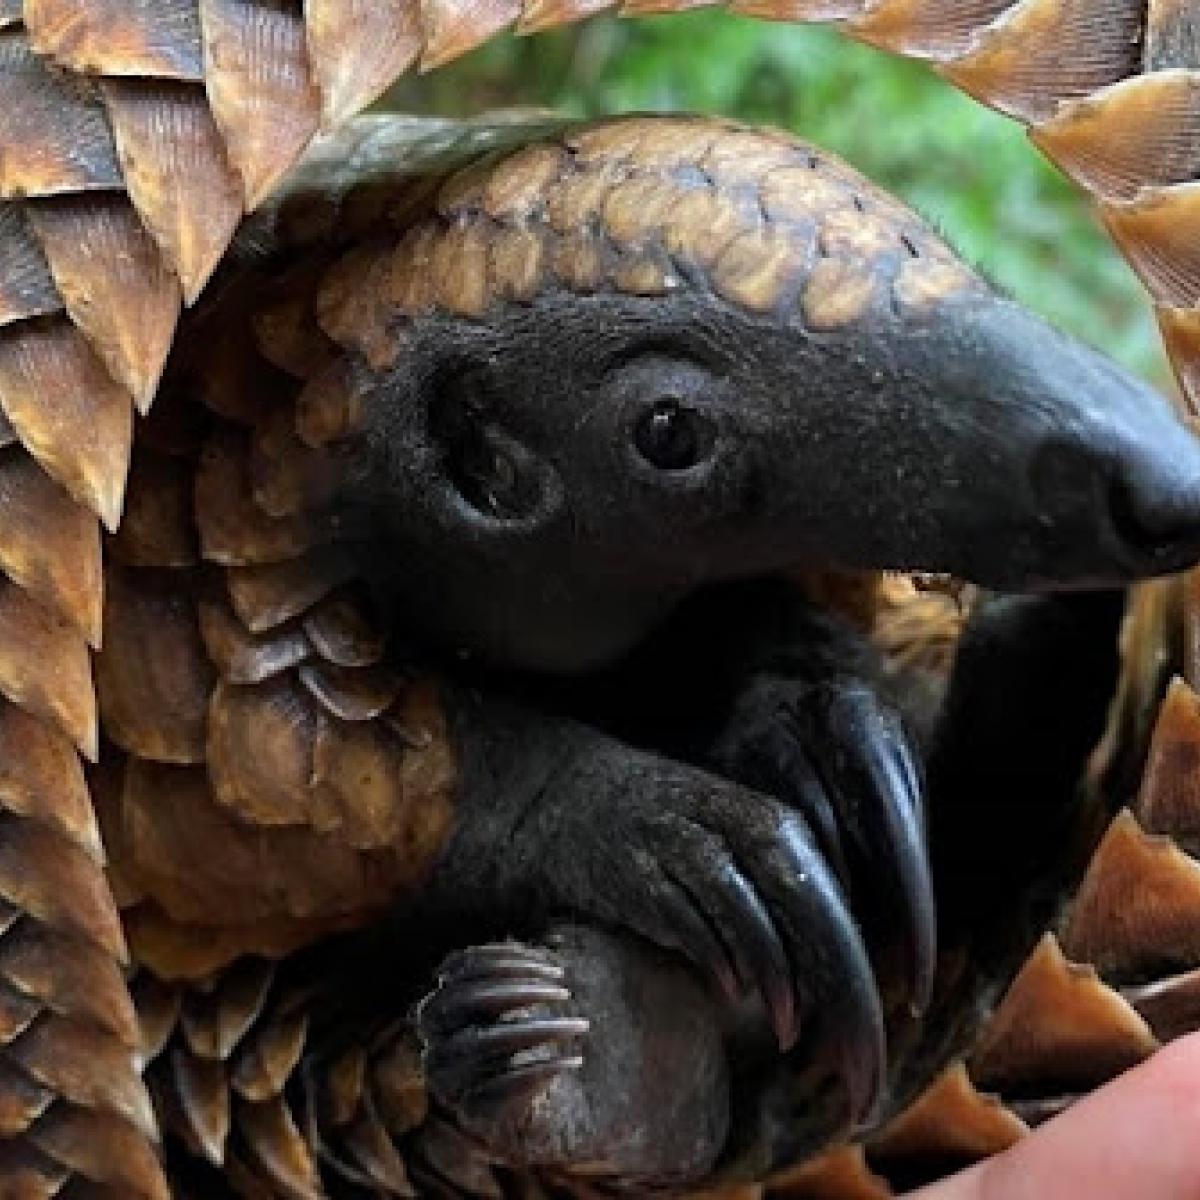 Pangolins (pictured is a black-bellied pangolin, native to Central and West Africa) are one of the most trafficked mammals in the world, valued for its meat and scales. Illegal trade in wildlife threatens local and global security as well as the essential services nature provides. USAID helps partner countries fight wildlife trafficking for a safer and healthier world. 